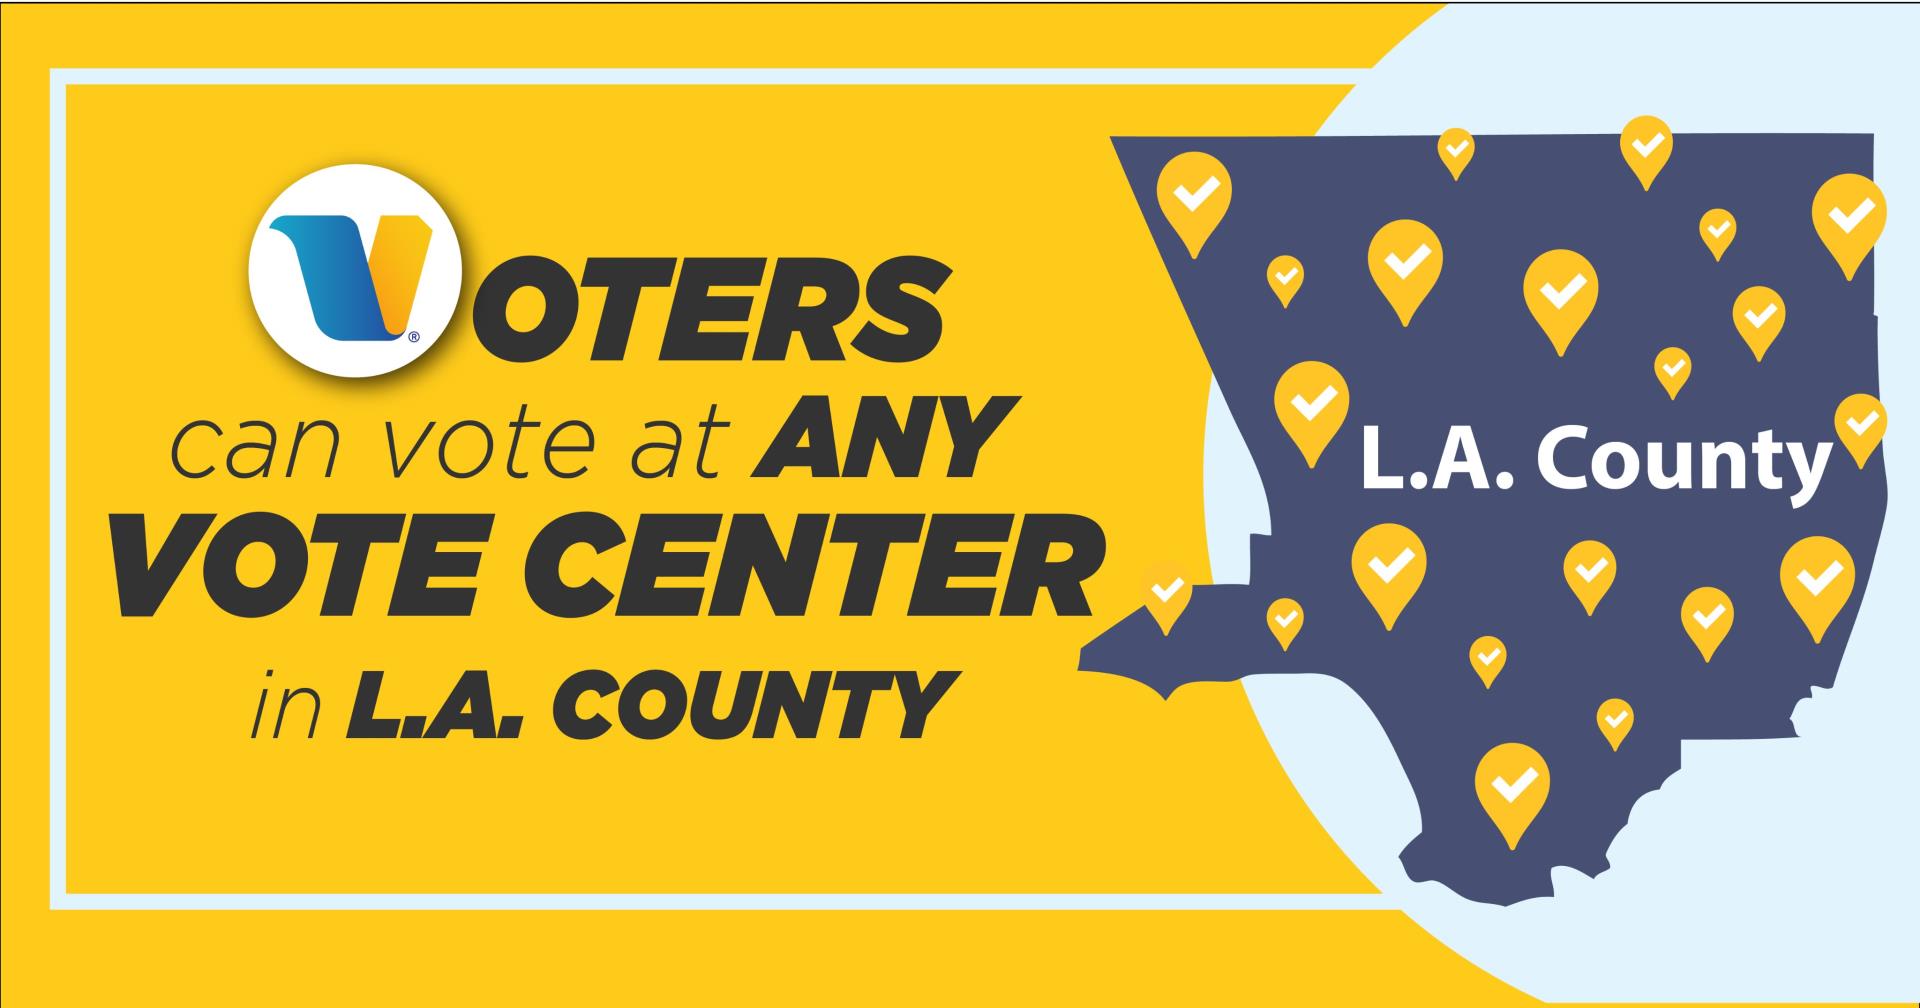 voters can vote at any vote center in L.A. County